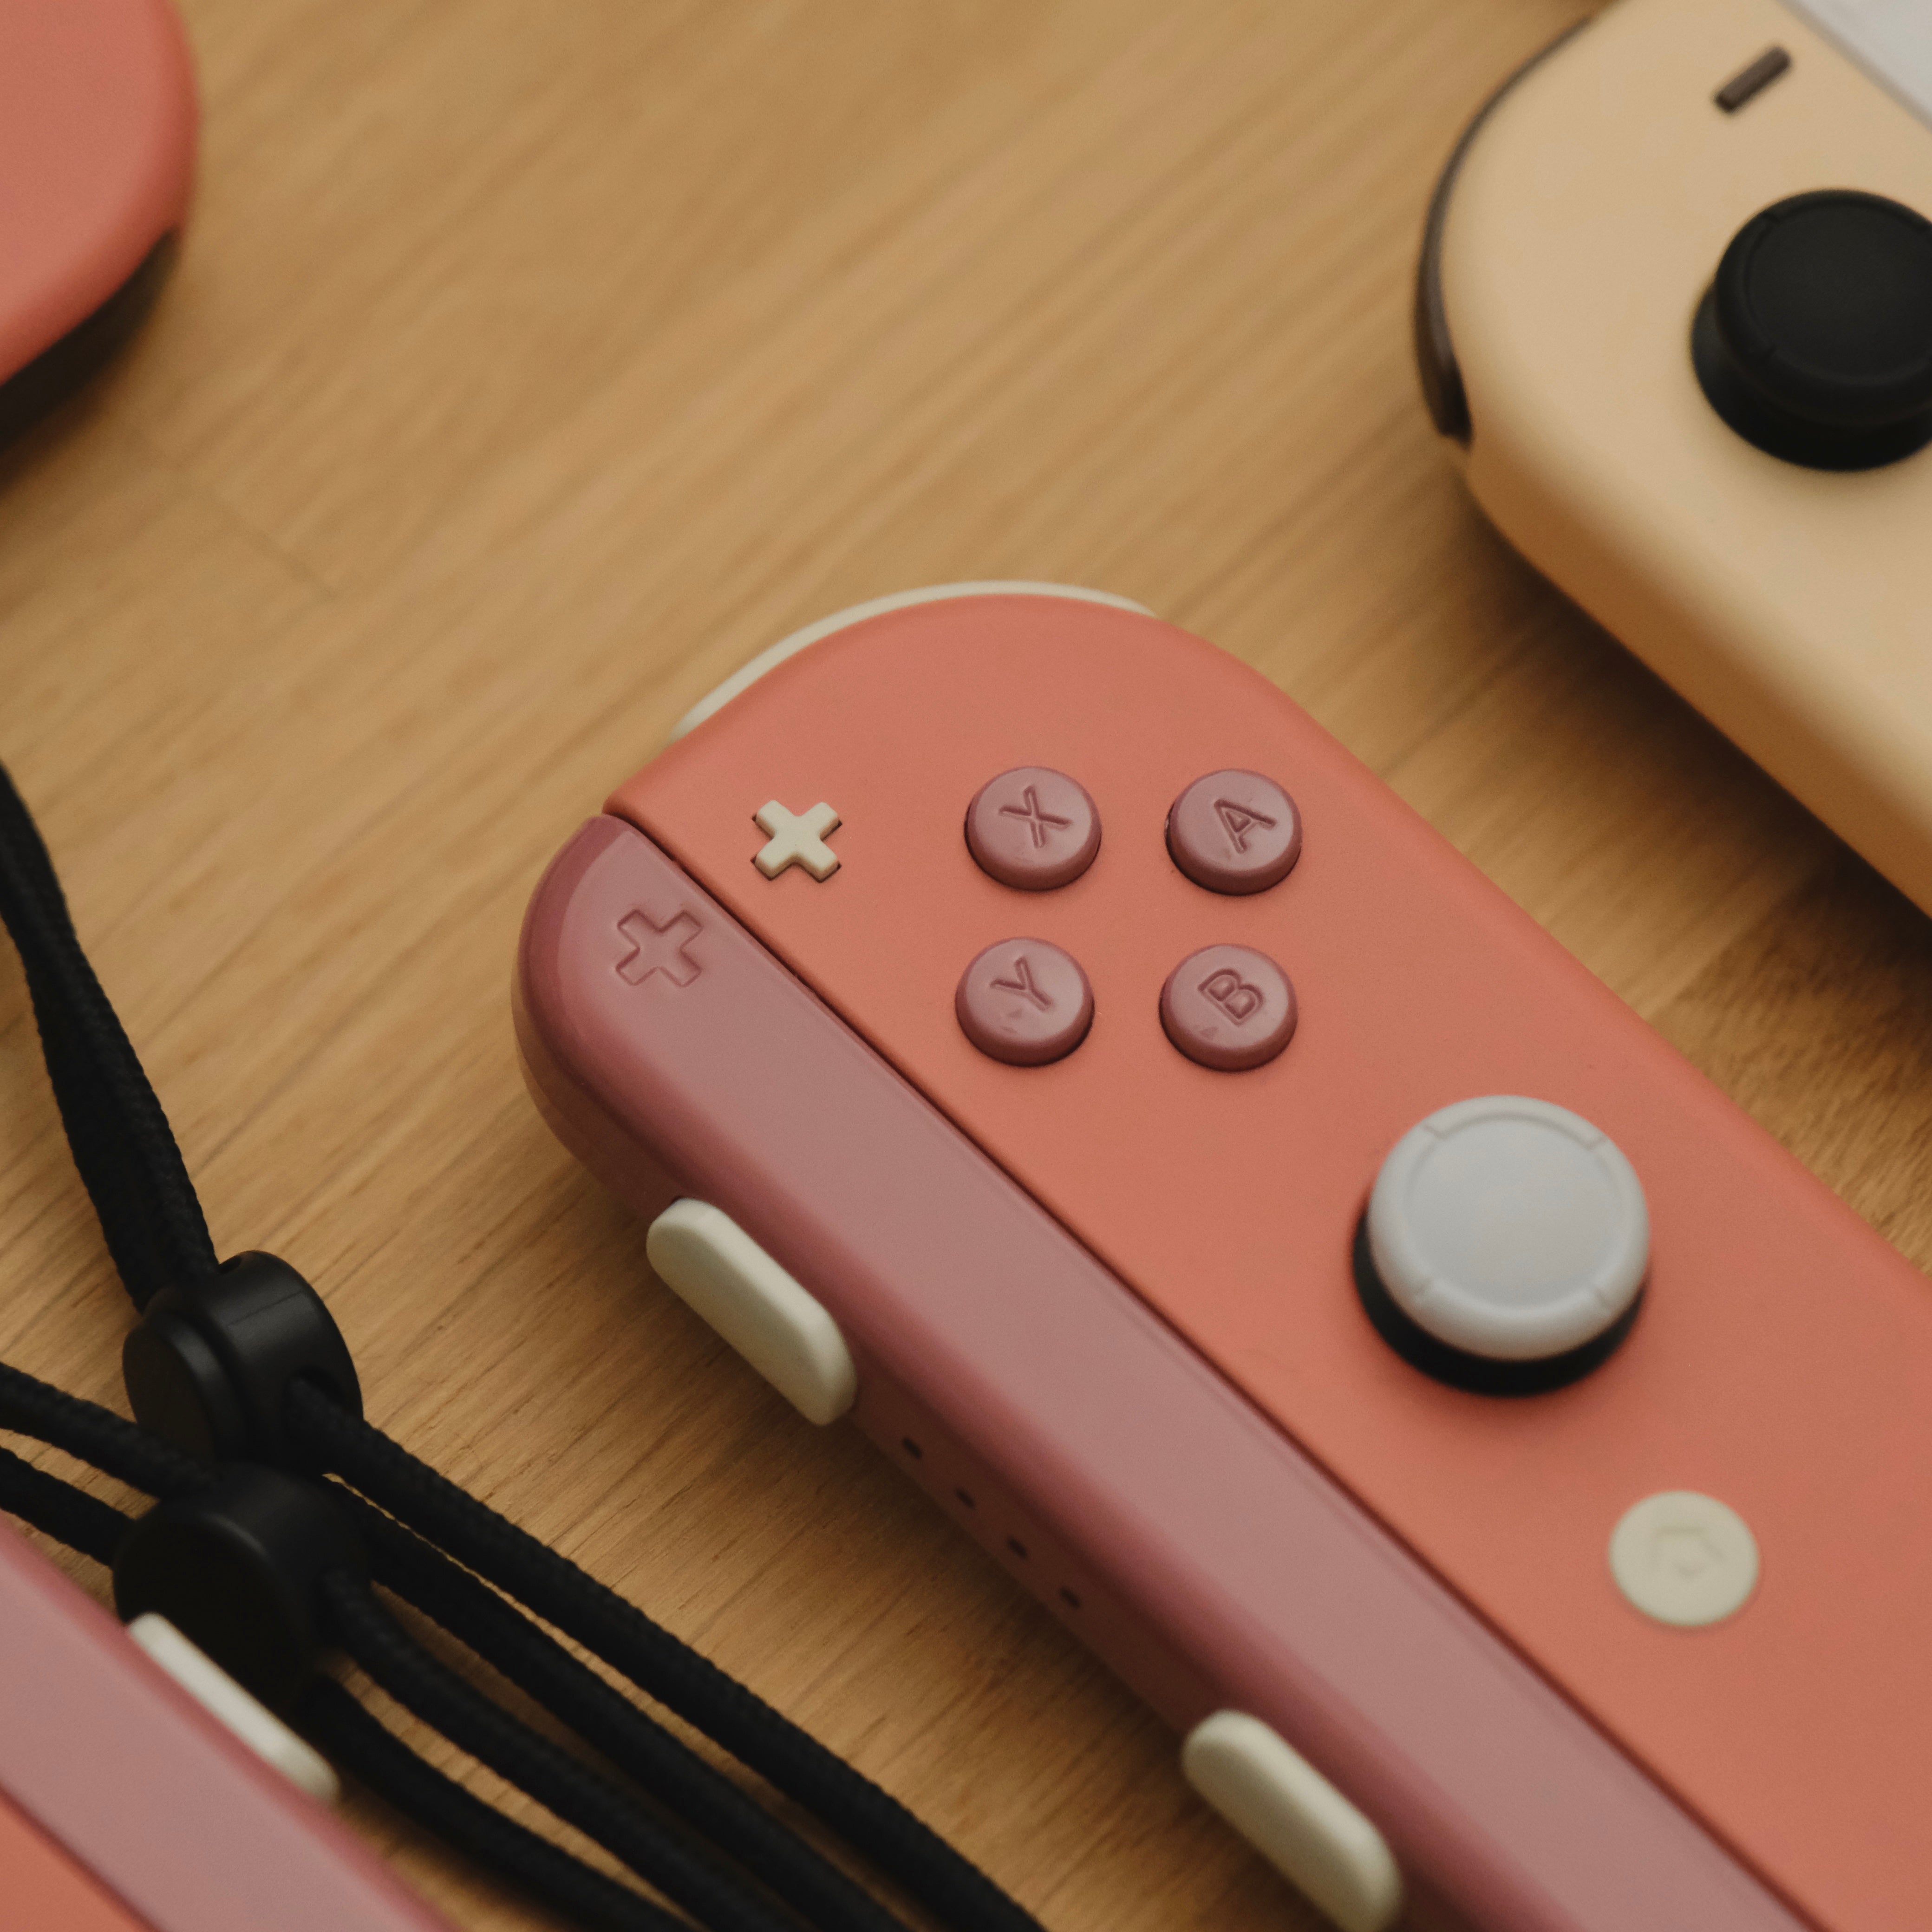 Pastel Joy-Cons for Nintendo Switch Are Now Available to Preorder